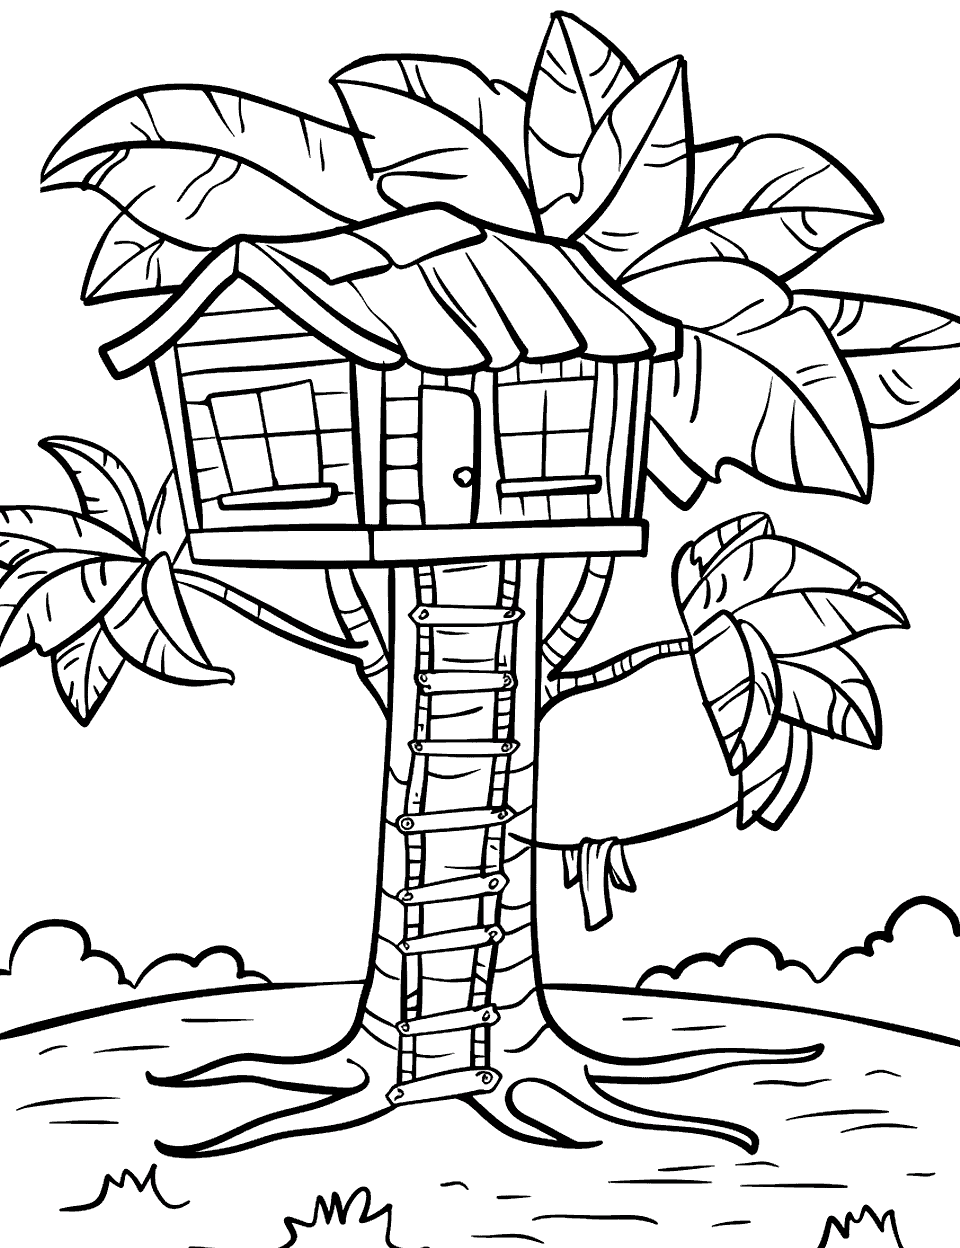 Tree House Adventure Coloring Page - A simple tree house built on the branches of a sturdy tree.